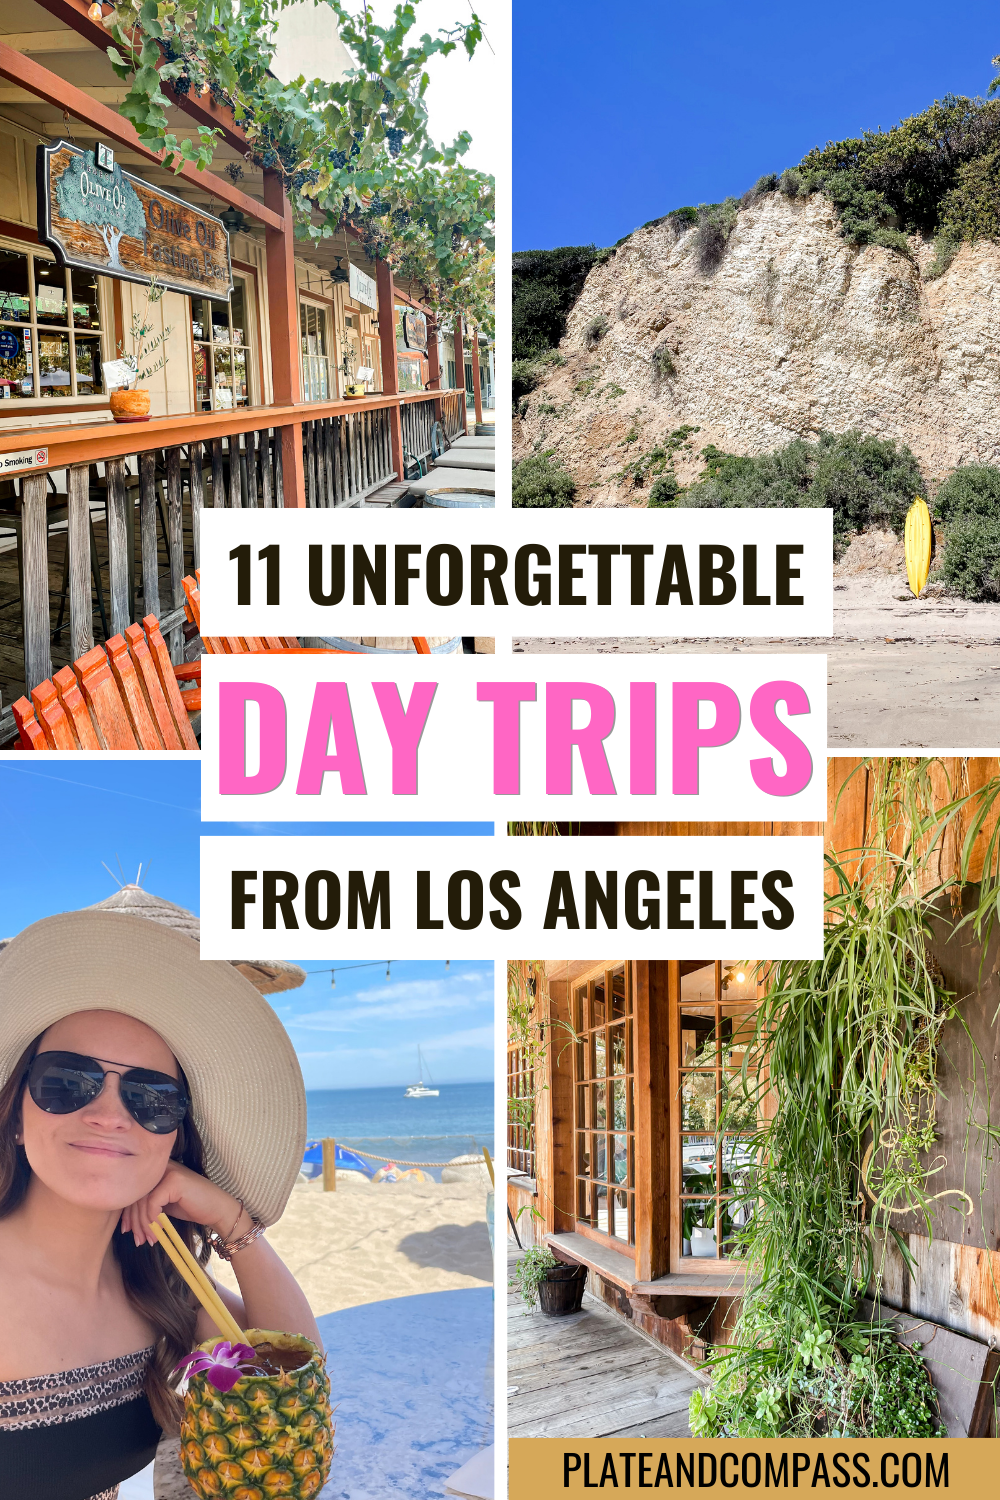 Day Trips from Los Angeles